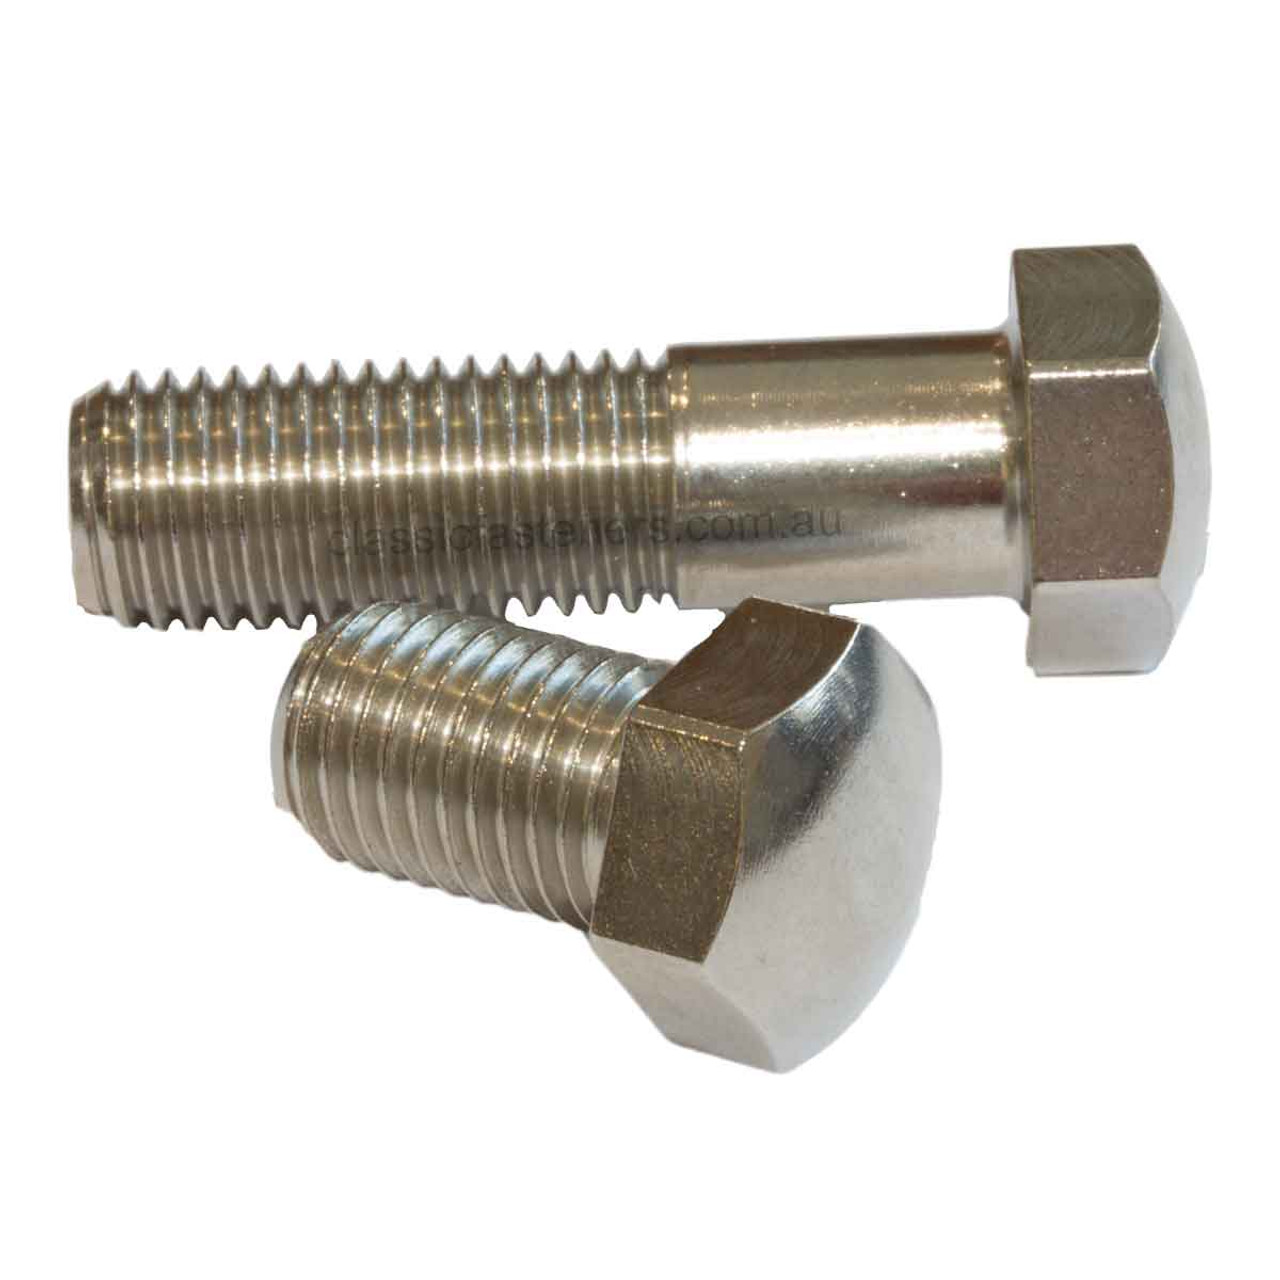 3/8 BSF x 1 3/4 Dome Head Stainless Bolt